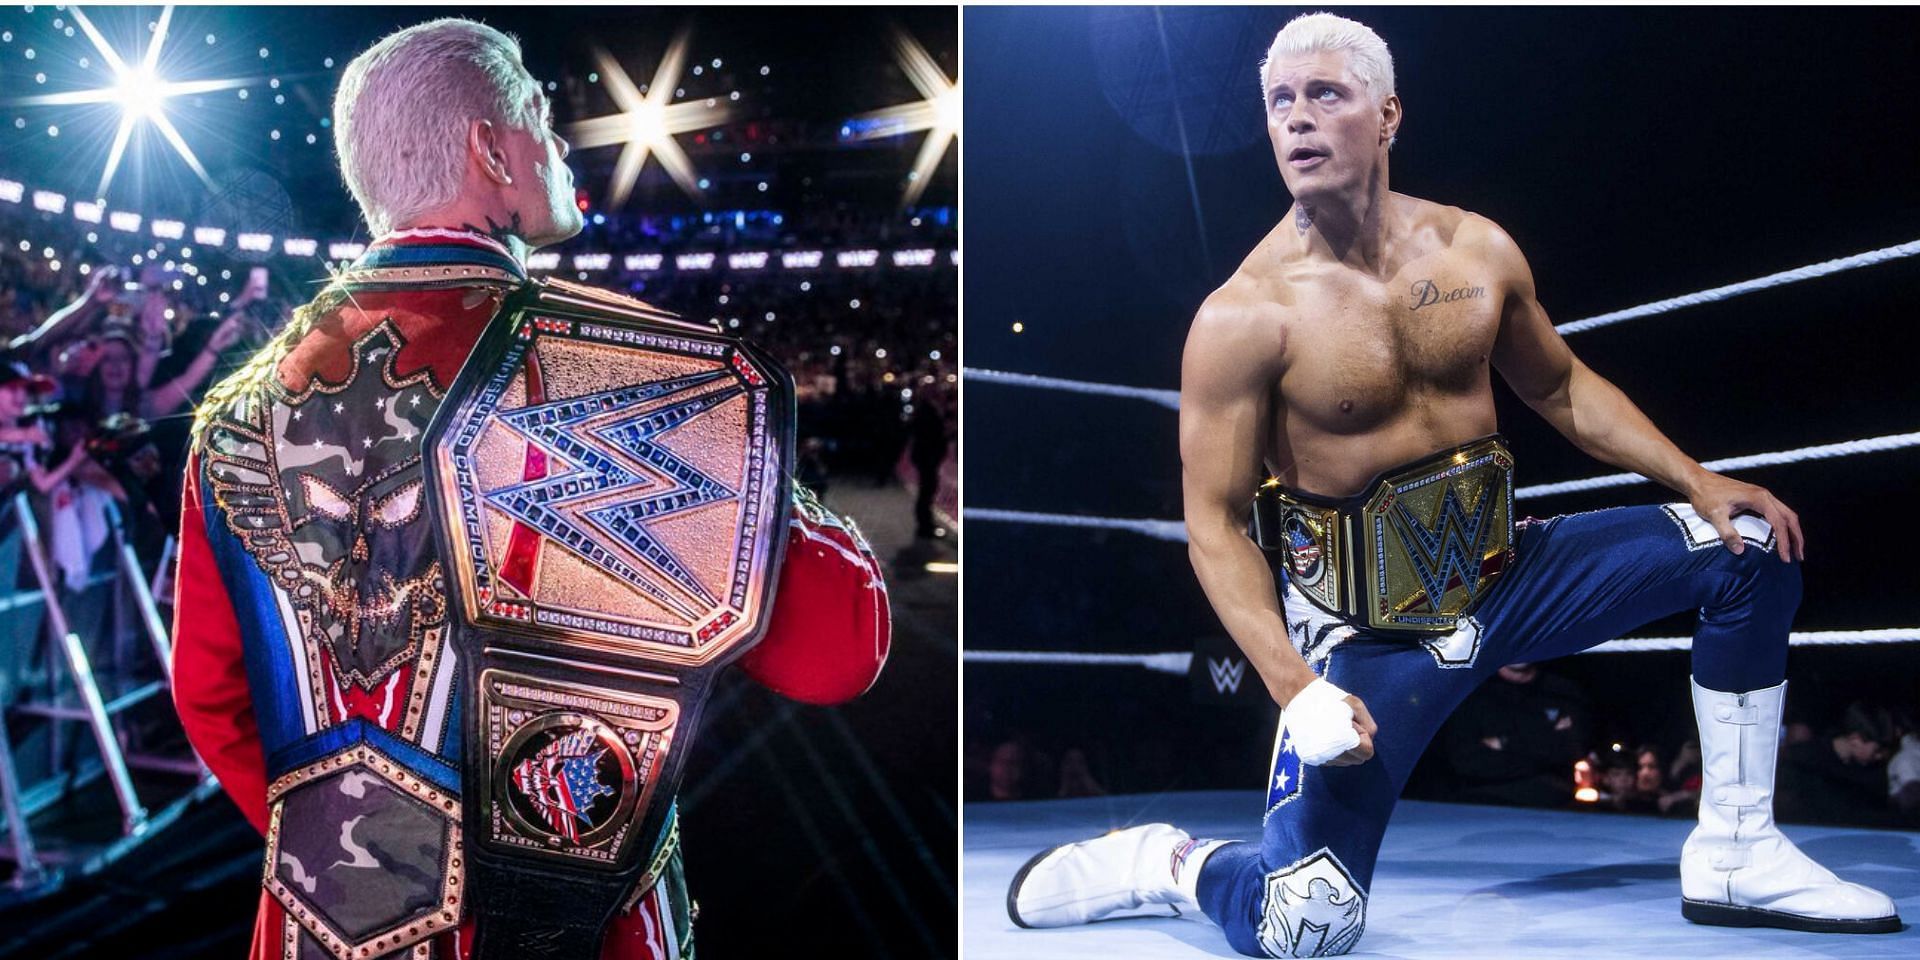 Could Cody Rhodes lose his title to this WWE legend?